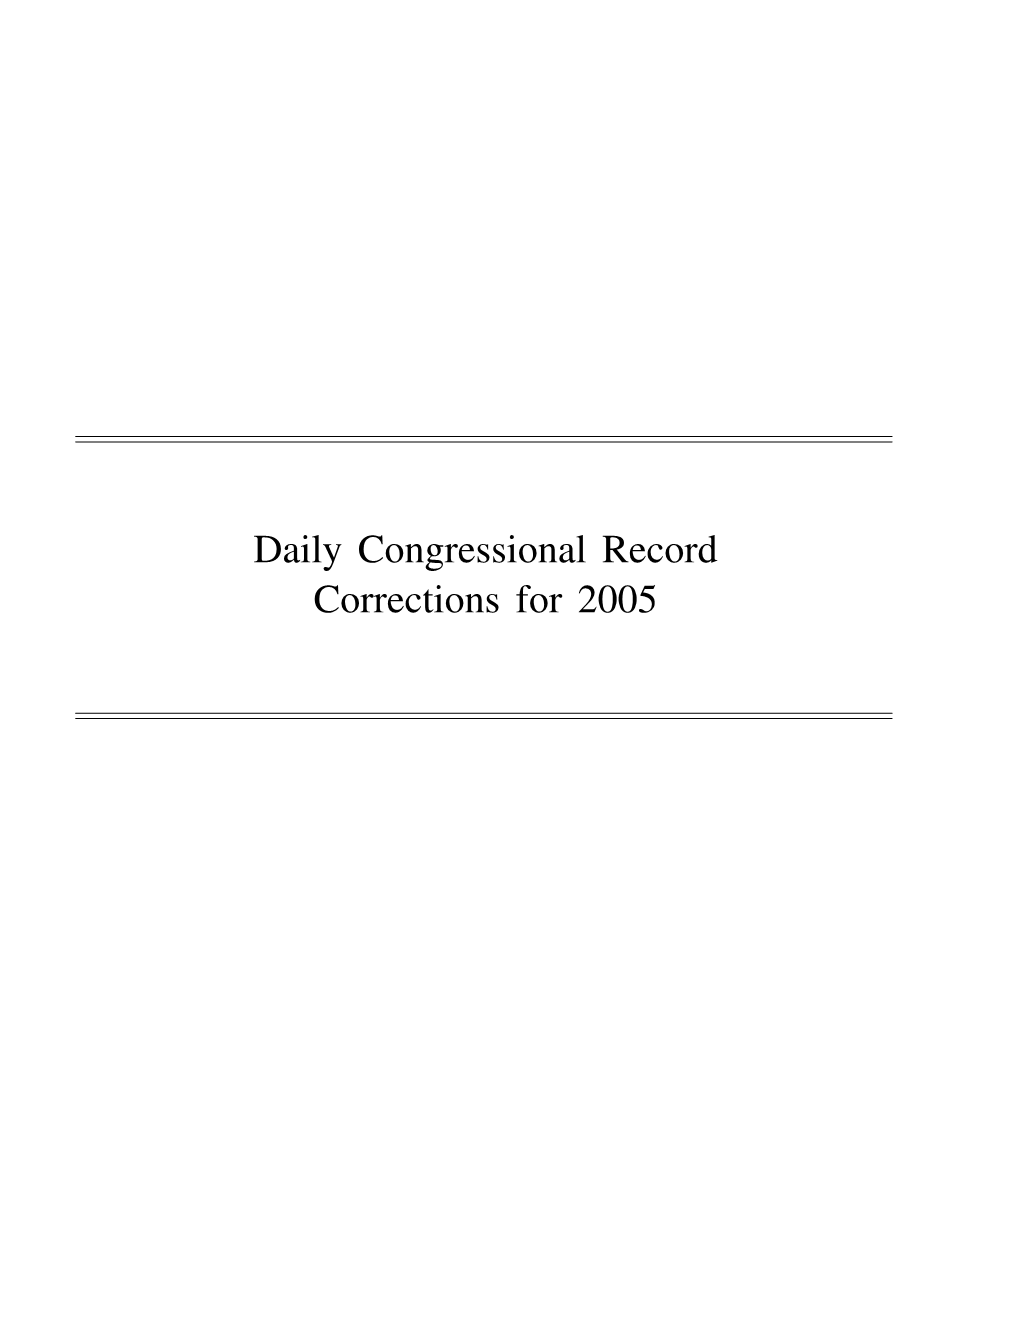 Daily Congressional Record Corrections for 2005